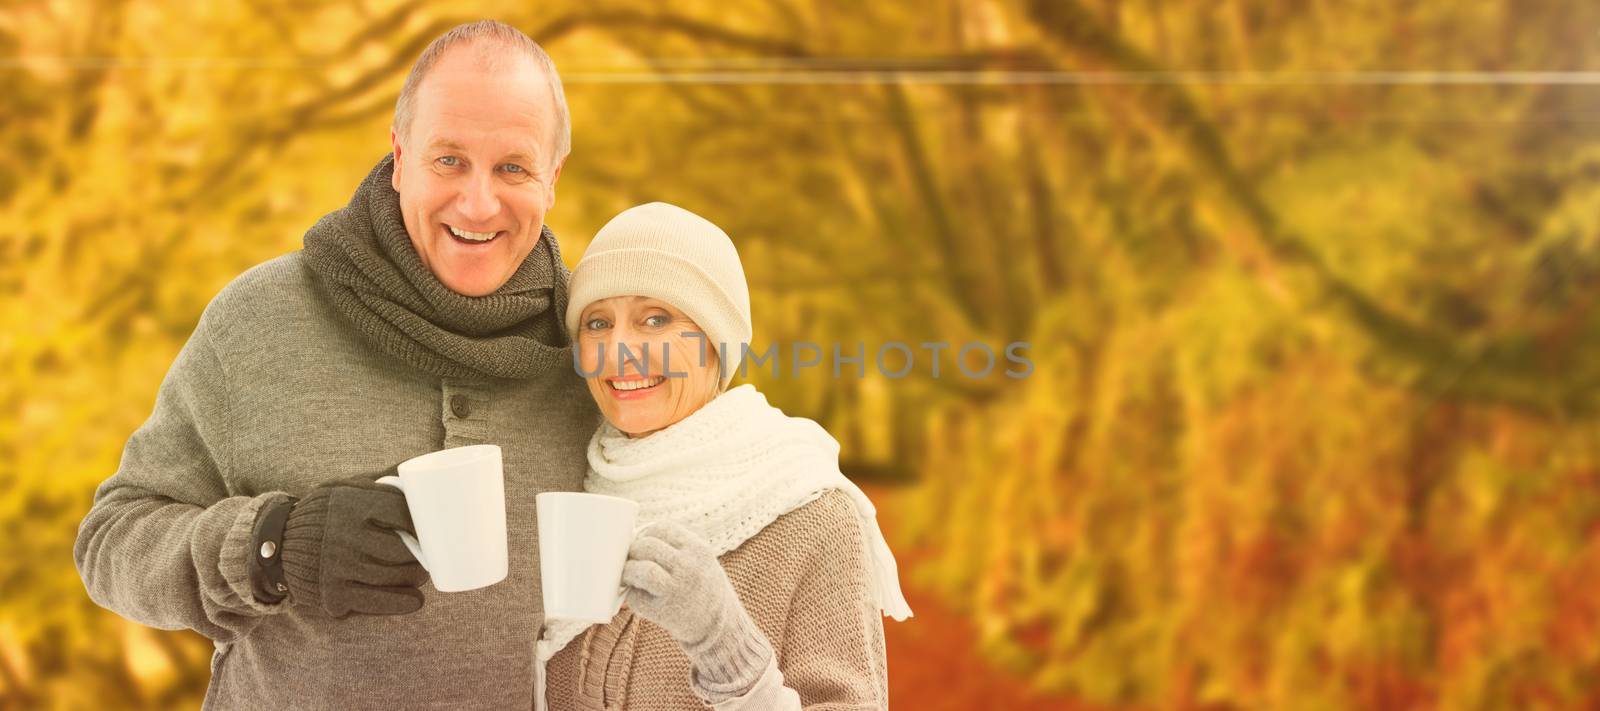 Happy mature couple in winter clothes holding mugs against peaceful autumn scene in forest